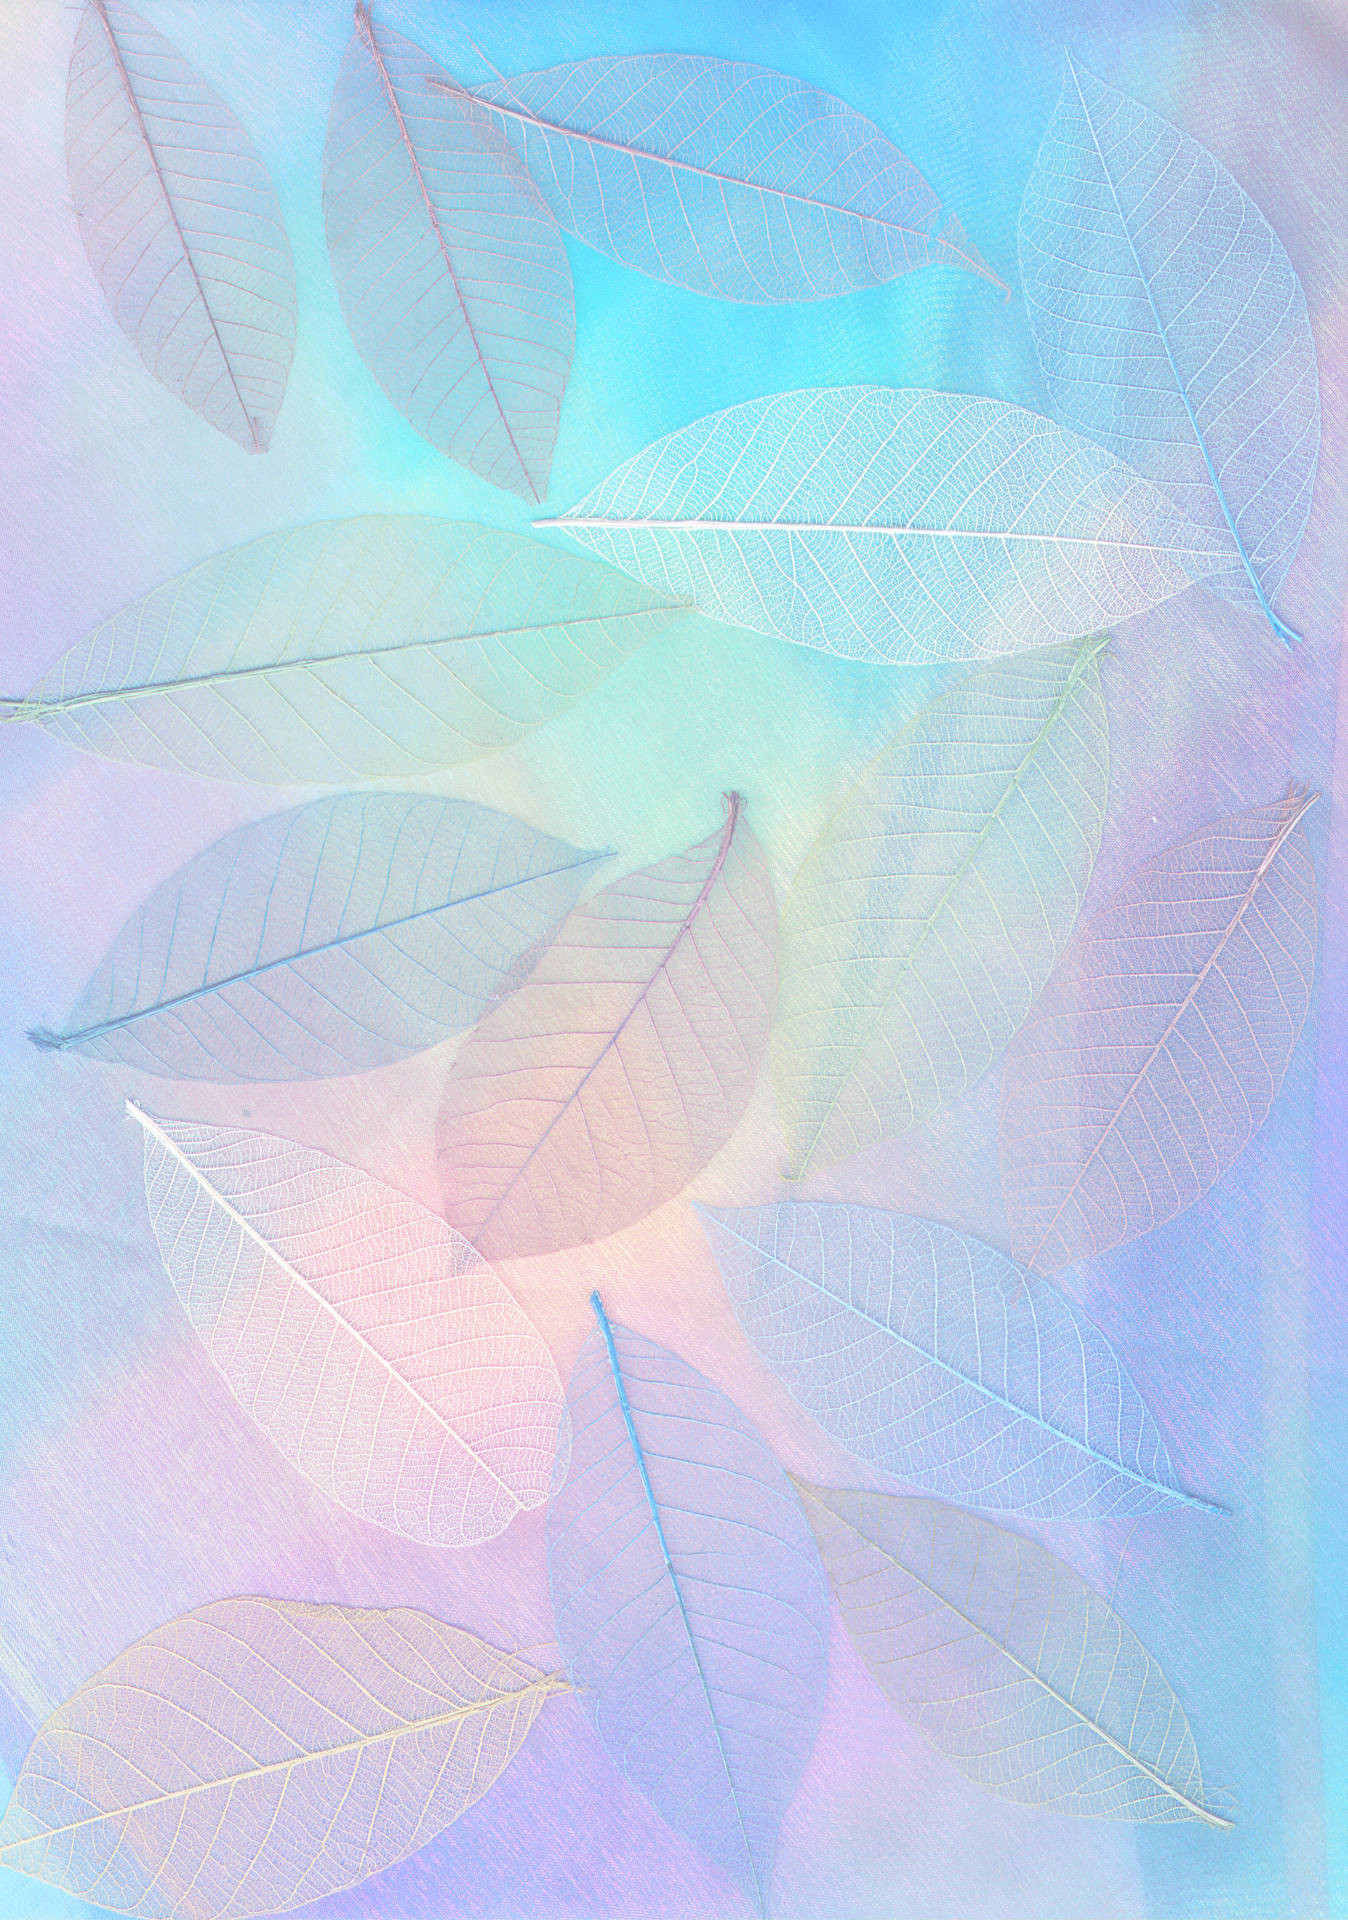 Pastel 2484X3539 Wallpaper and Background Image